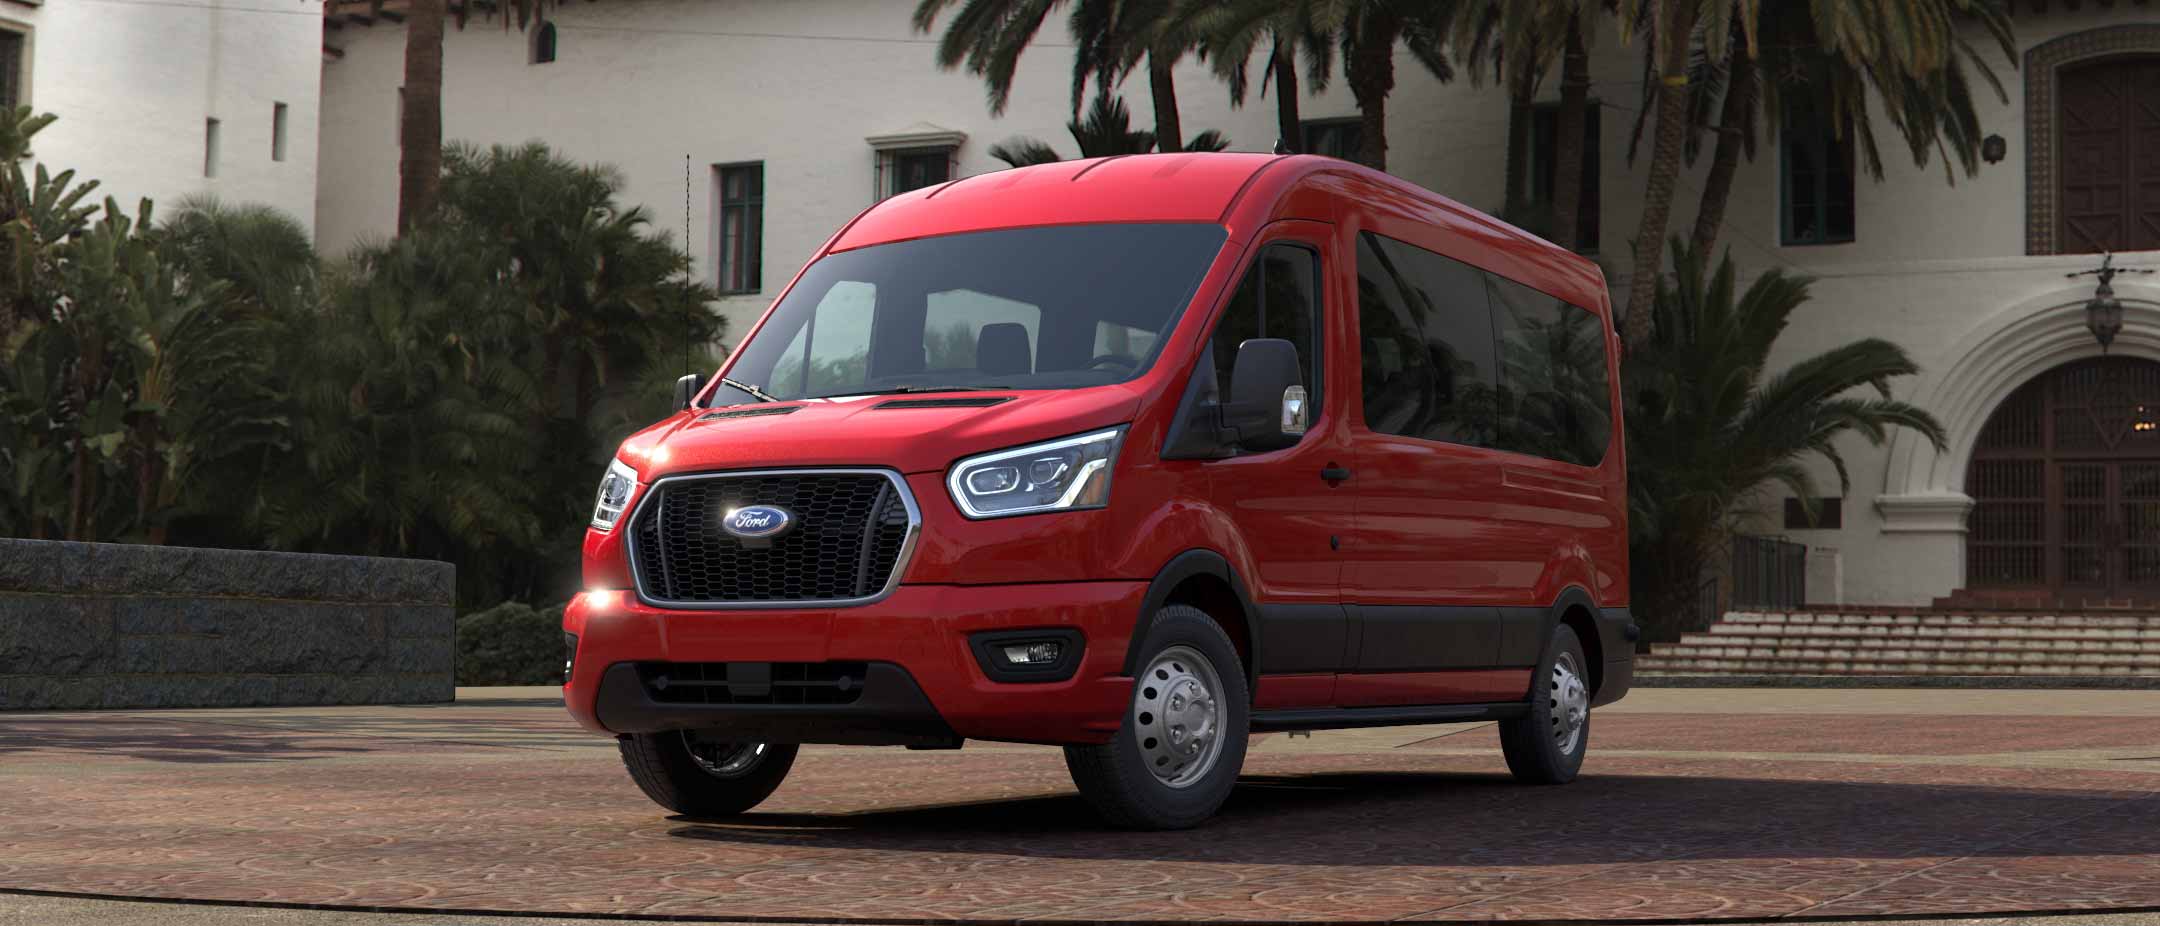 https://www.vdm.ford.com/content/dam/vdm_ford/live/en_us/ford/nameplate/transitvanwagon/2024/collections/_360/race-red/trn_pwgn_24_xlt_ext_360_racered_01.jpg